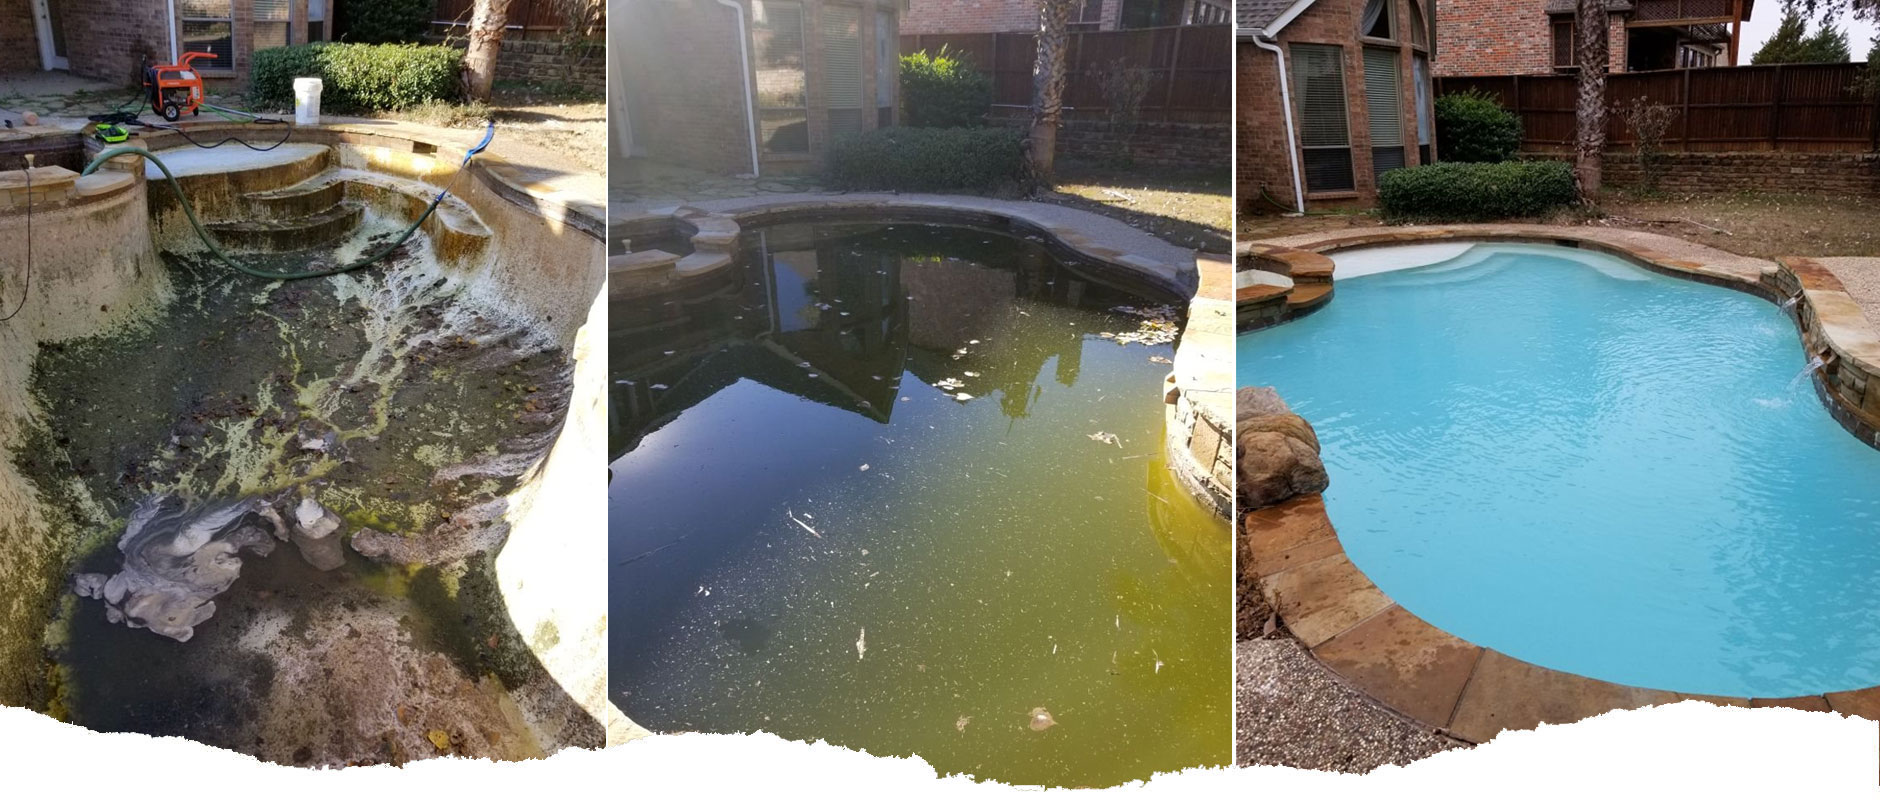 Three different photos of a backyard pool. The middle picture shows the pool with dirtry green algea water. Left picture shows the pool drained with a lot of dirt, debris and green algea on the bottom of the pool. The right side photo shows the pool clean, restored and full with clean clear water.